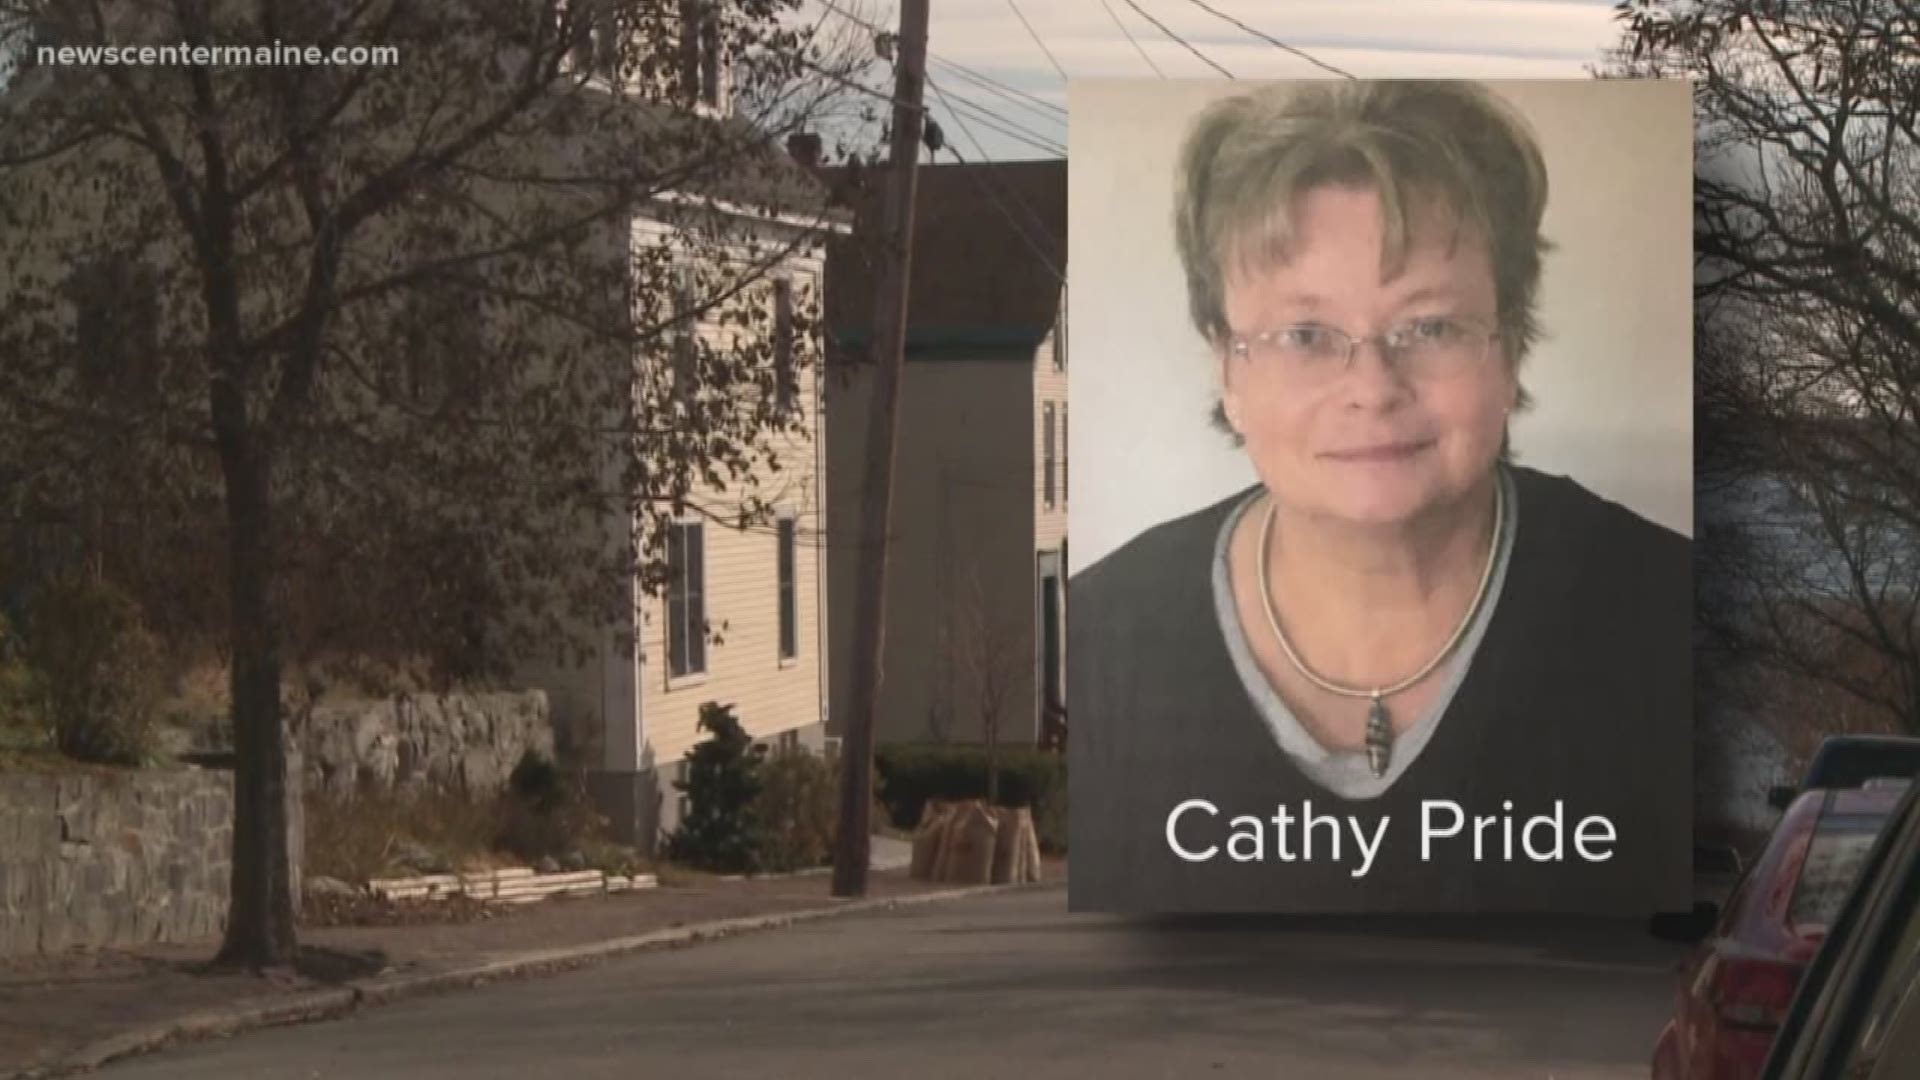 Portland police are asking for the public's help finding missing woman Cathy Pride.